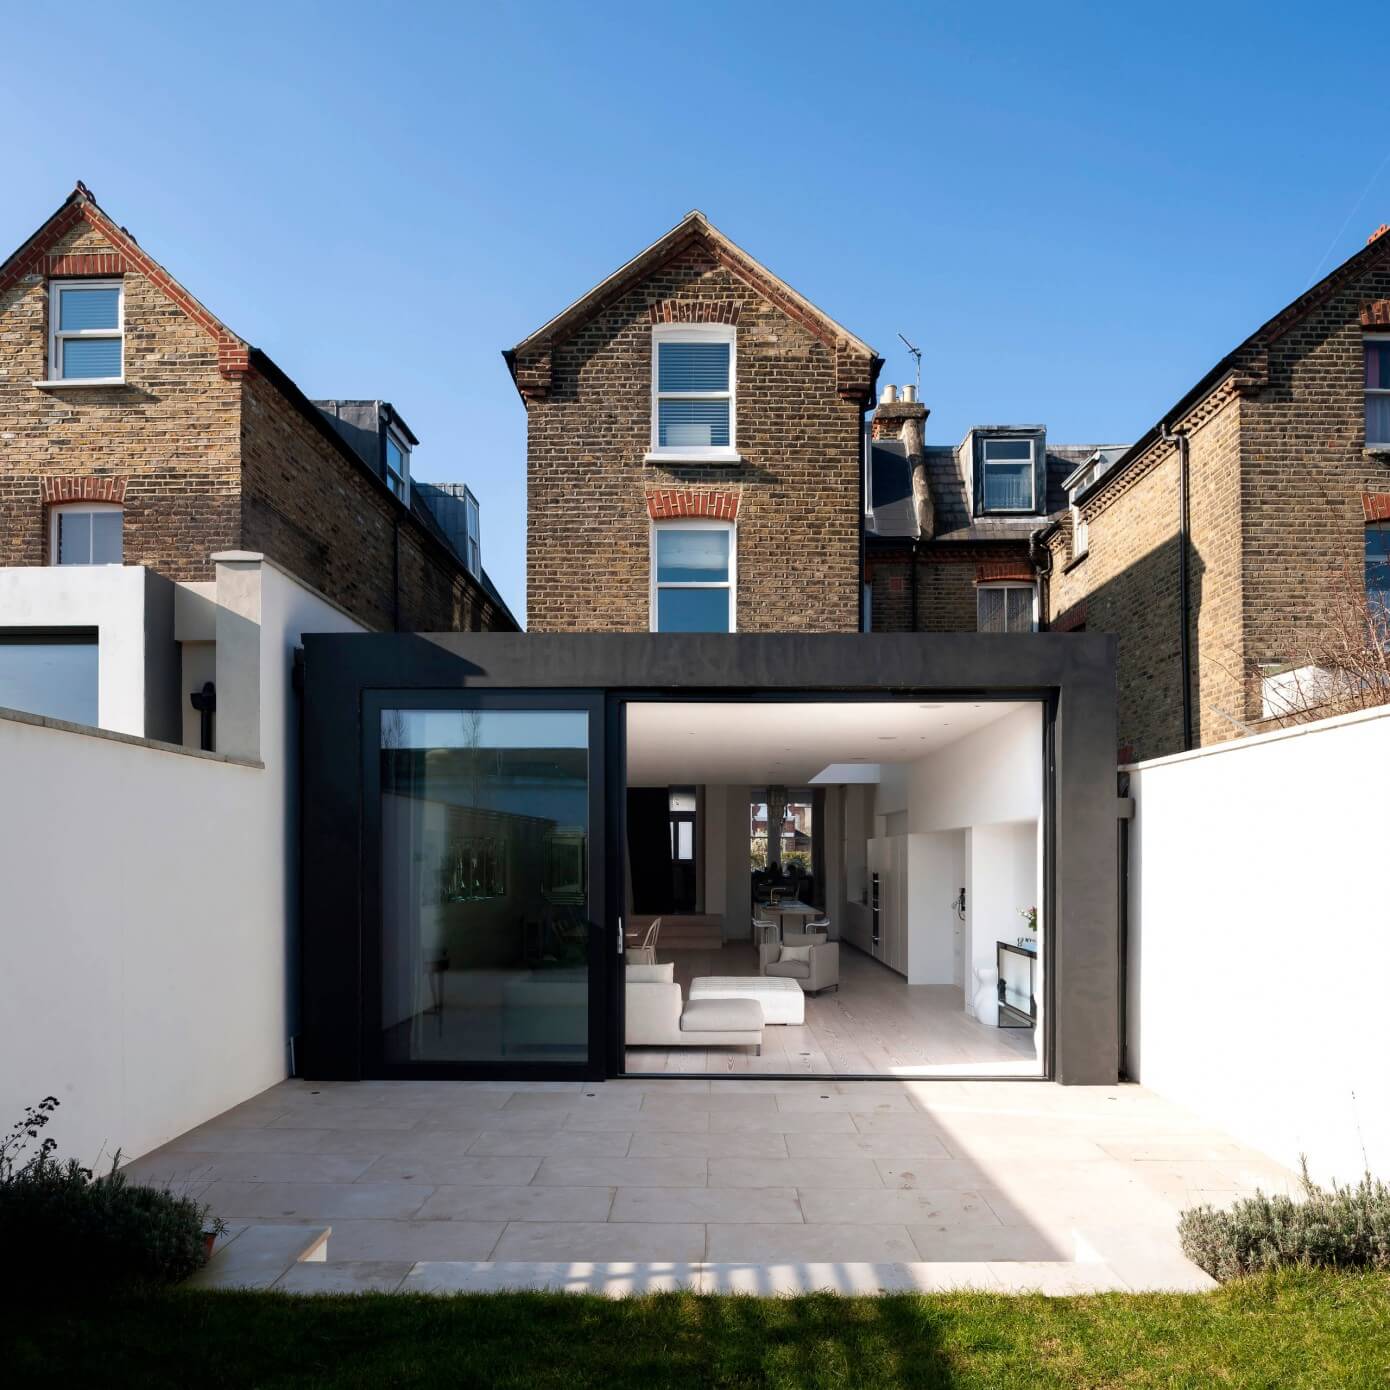 House in Homefield Road by Alex Findlater